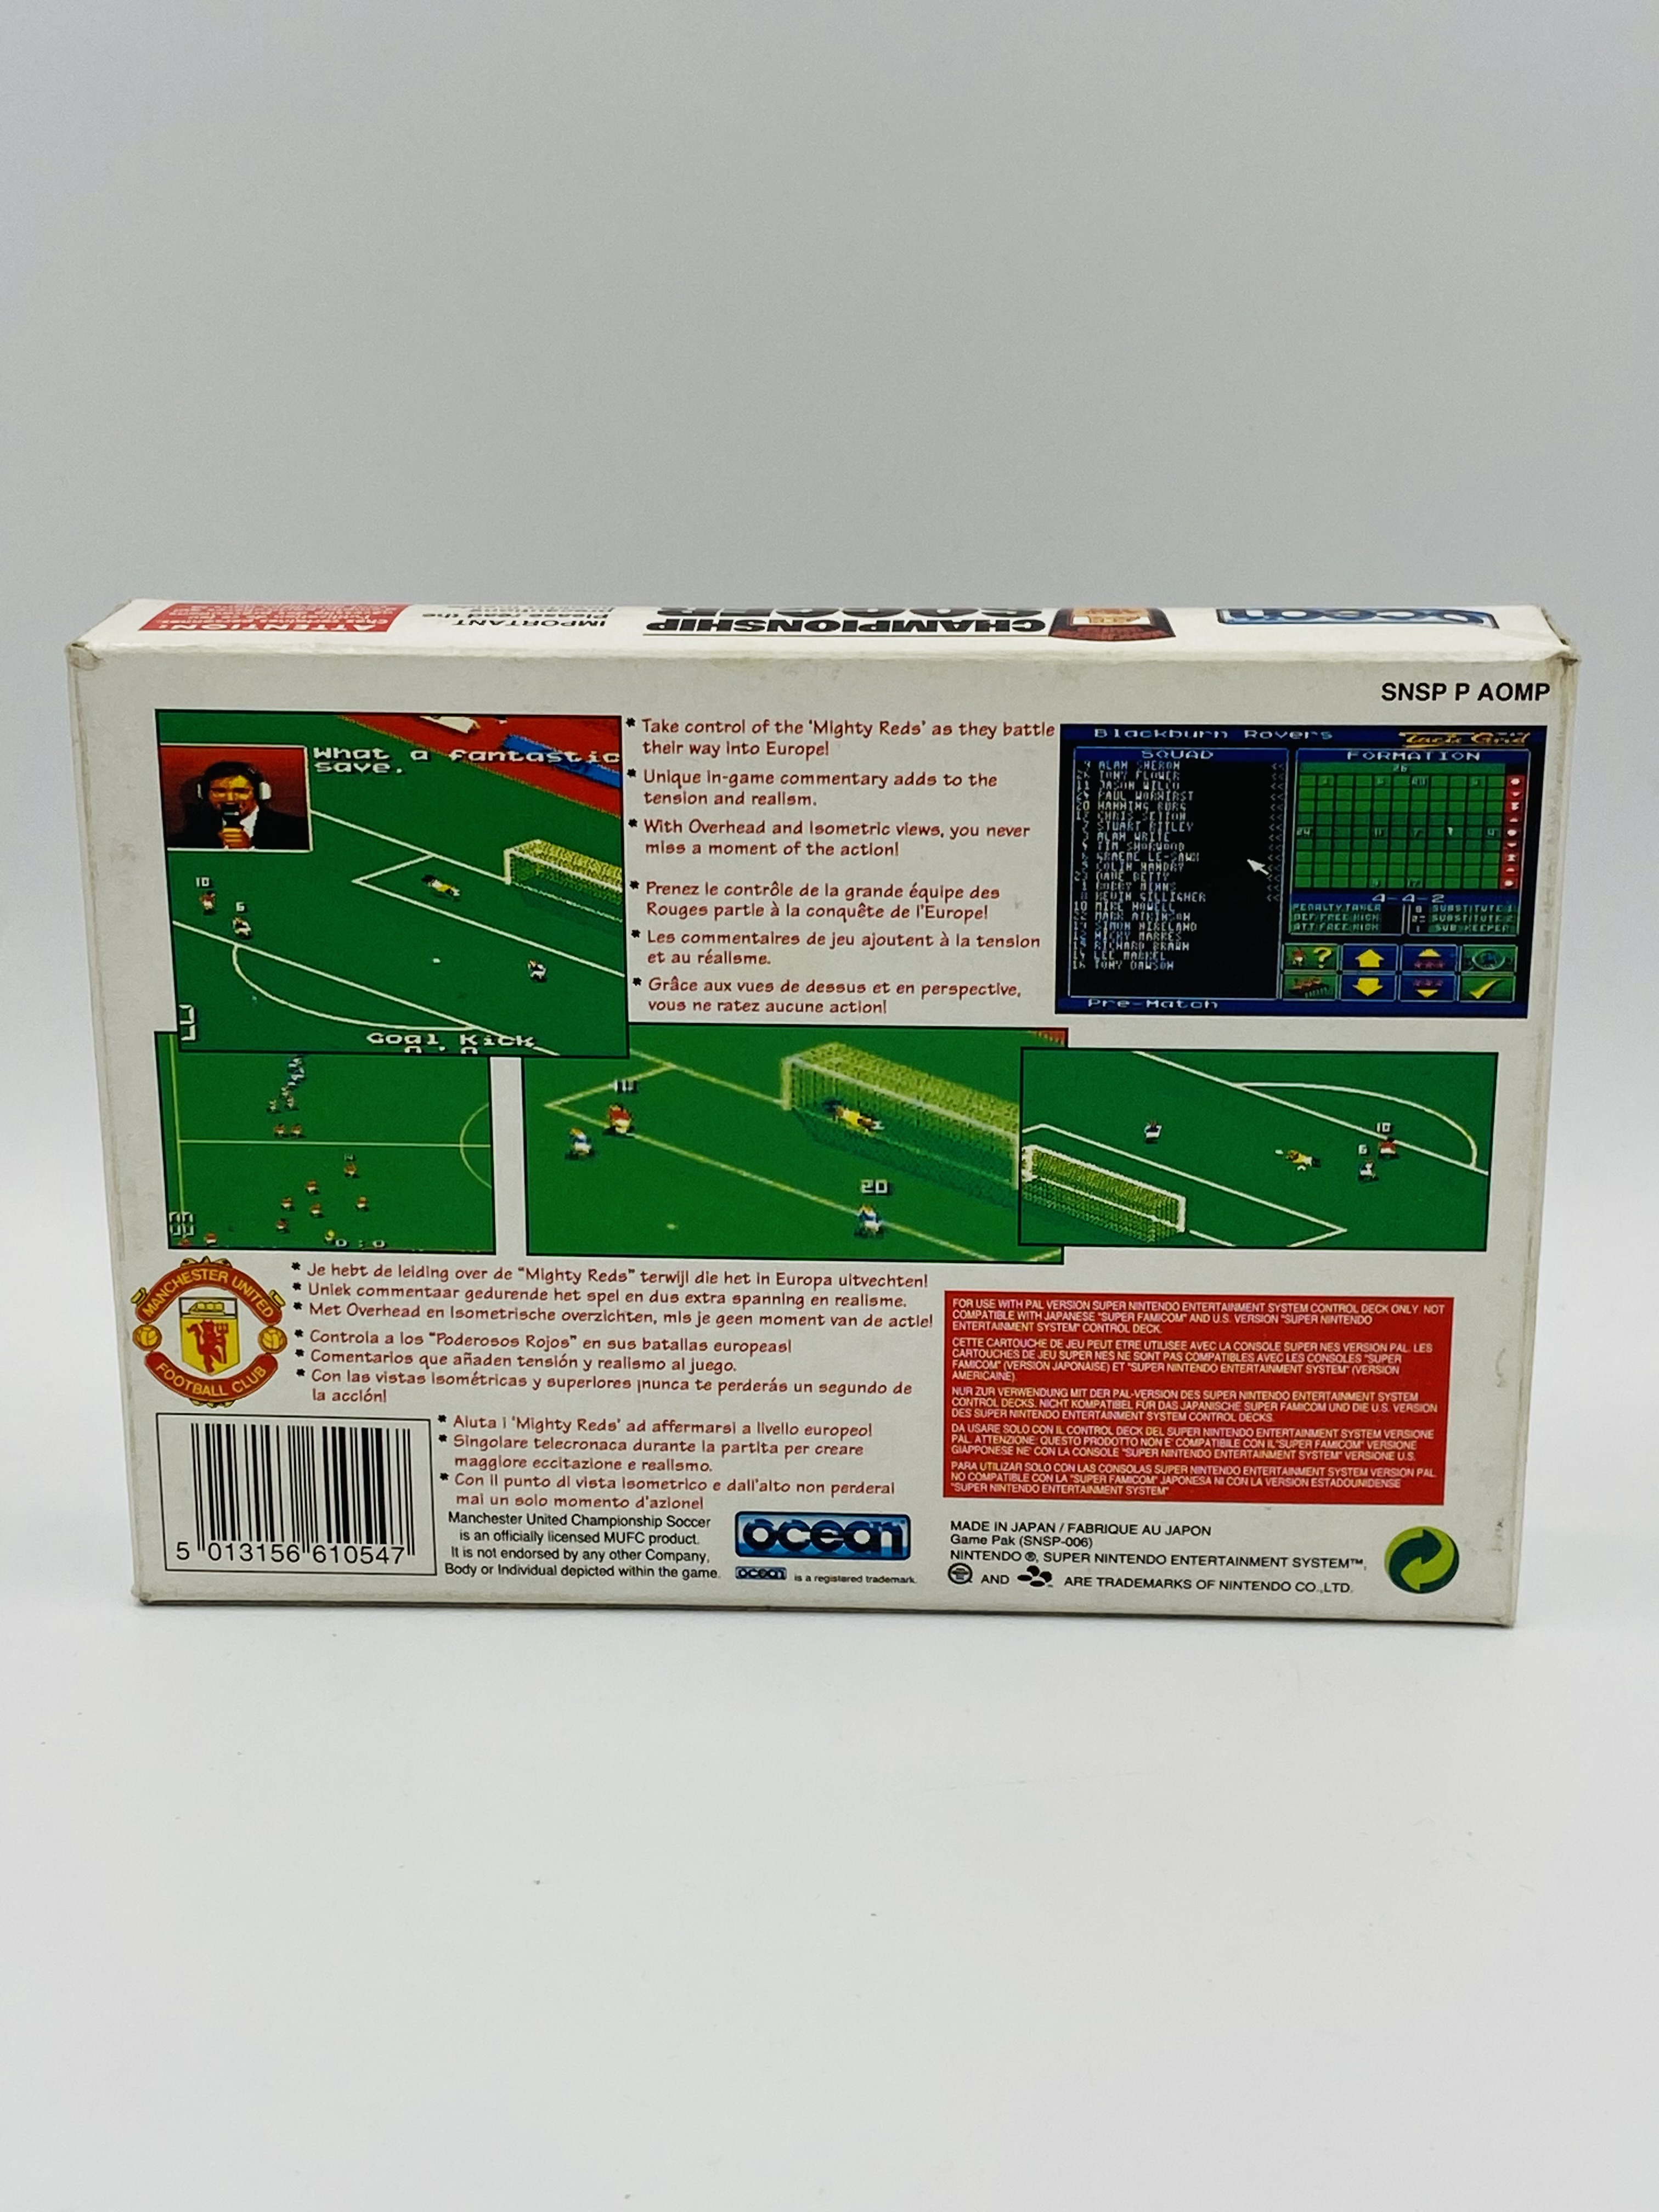 Ocean Super Nintendo Entertainment System Manchester United Championship Soccer, boxed - Image 2 of 5